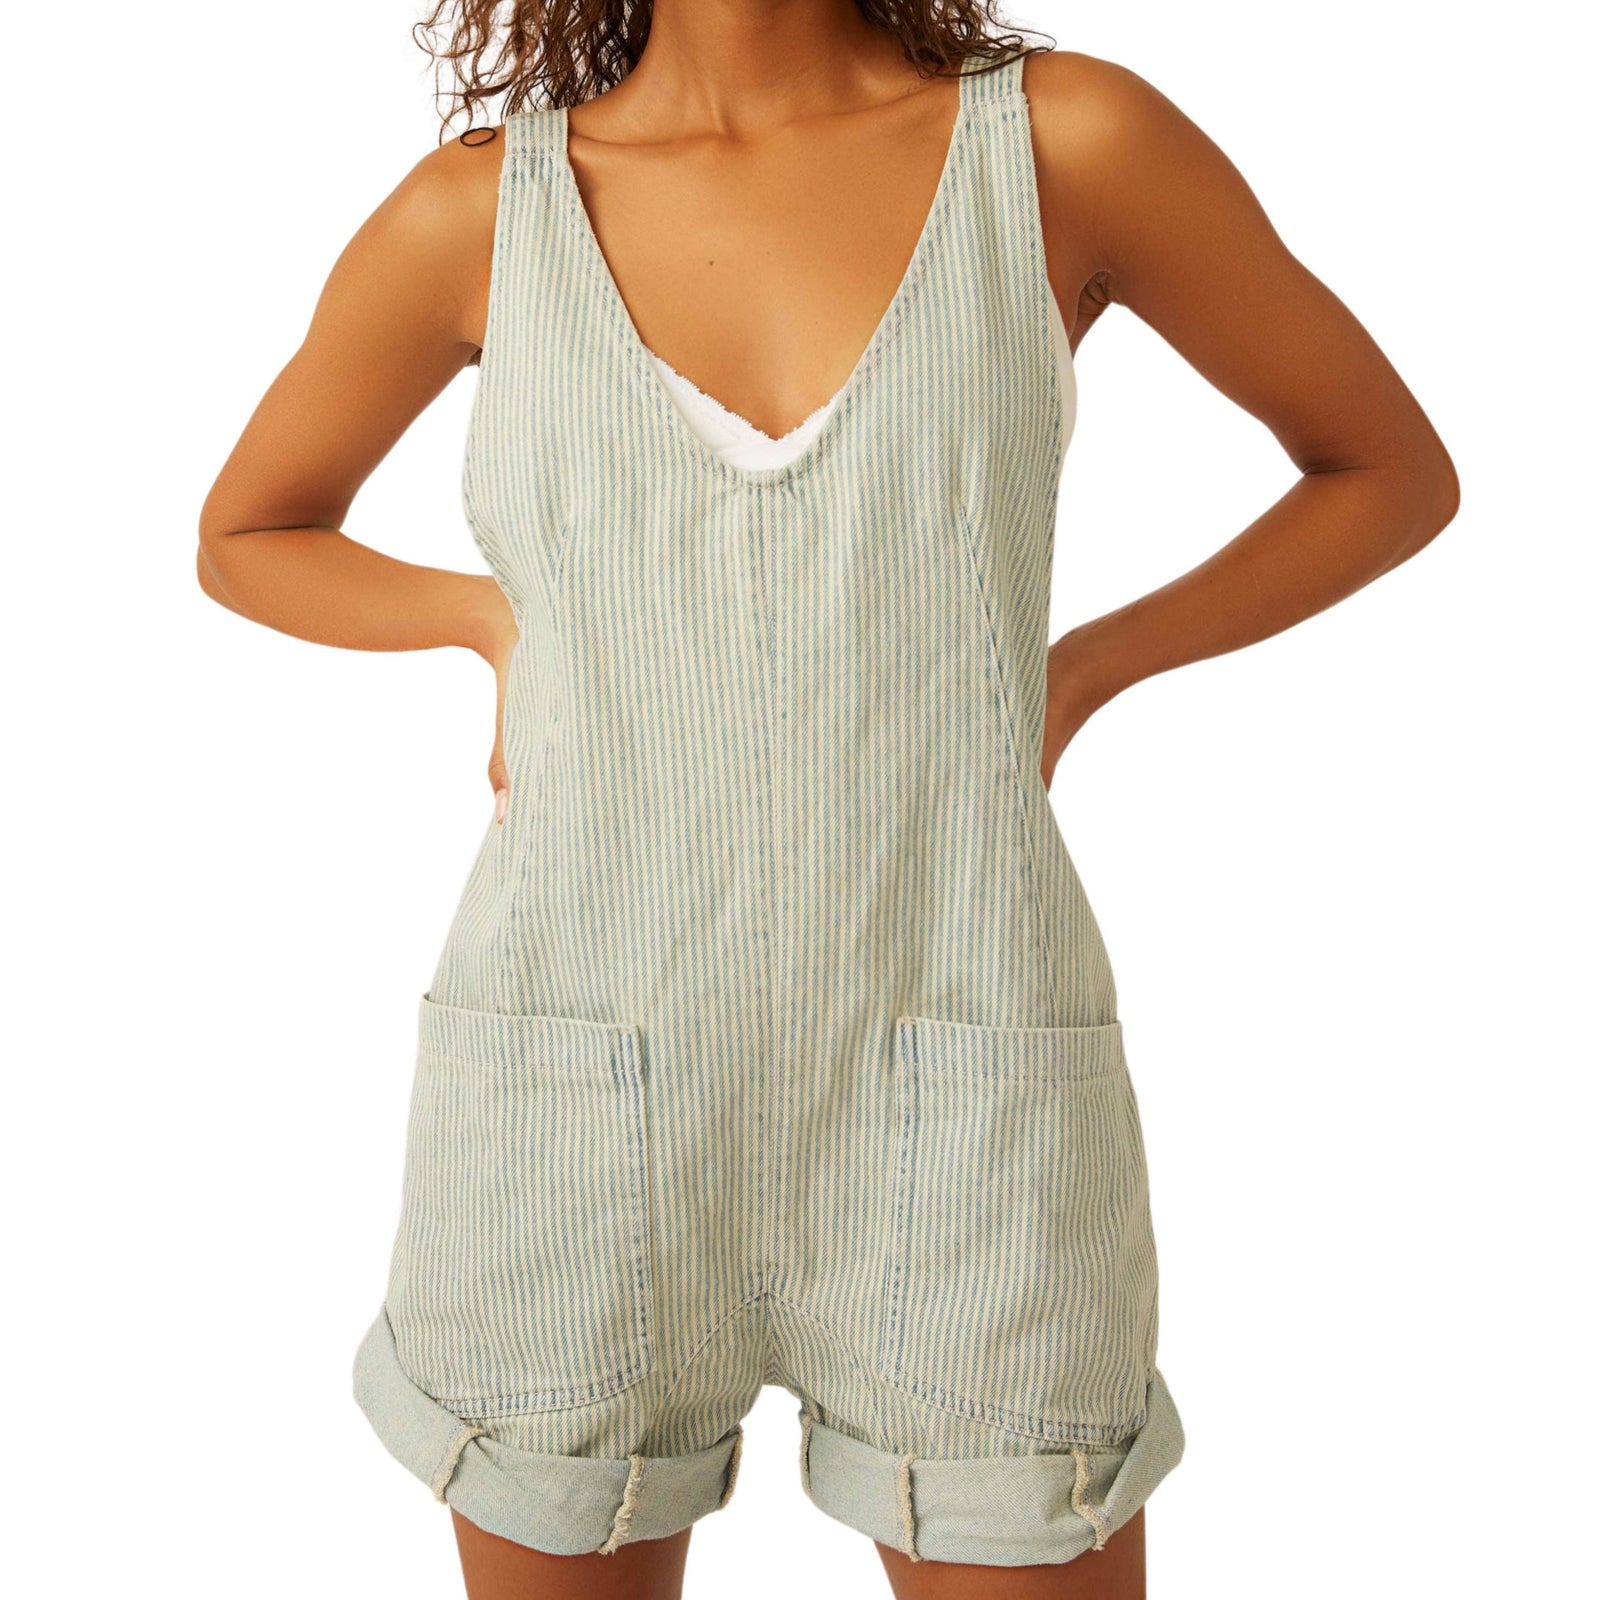 Free People We The Free High Roller Railroad Shortall